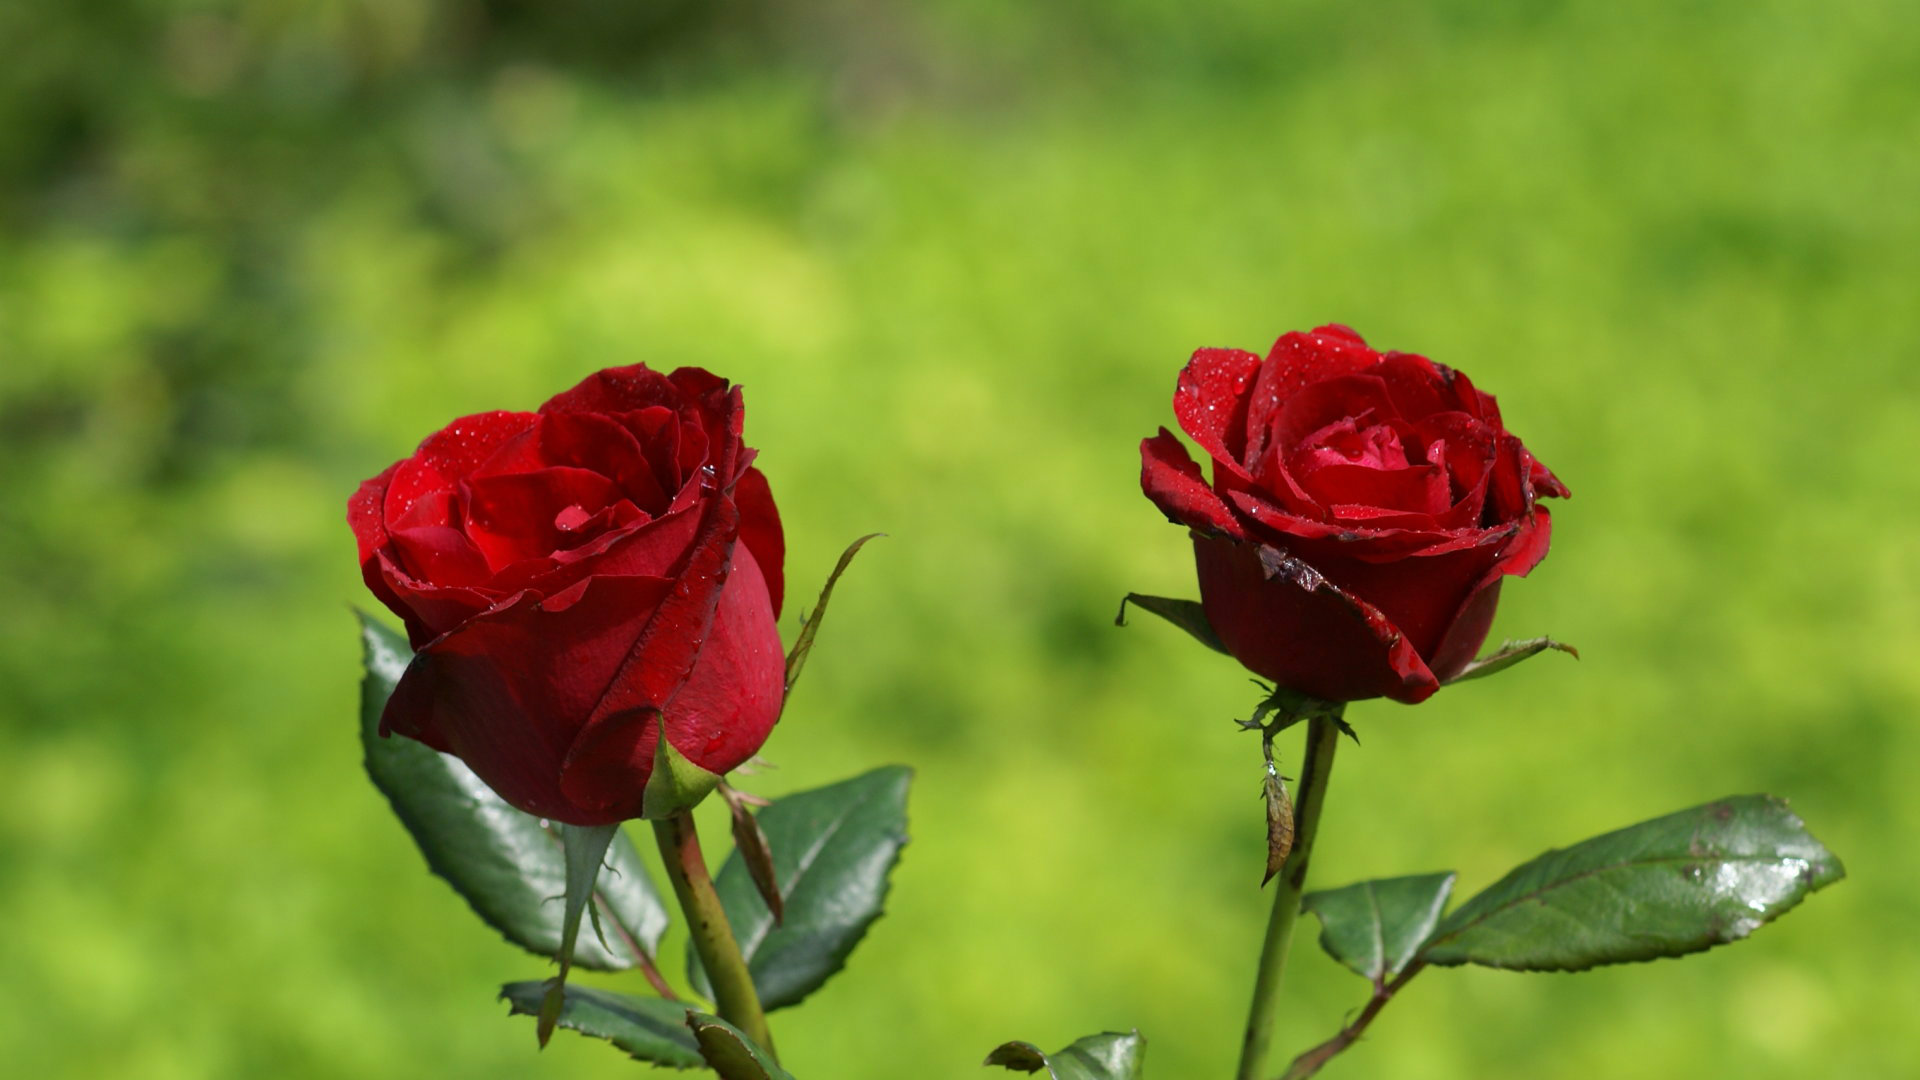 Widescreen Most Red Roses Hd Flowers Pictures On Nature Images Of Pc ...